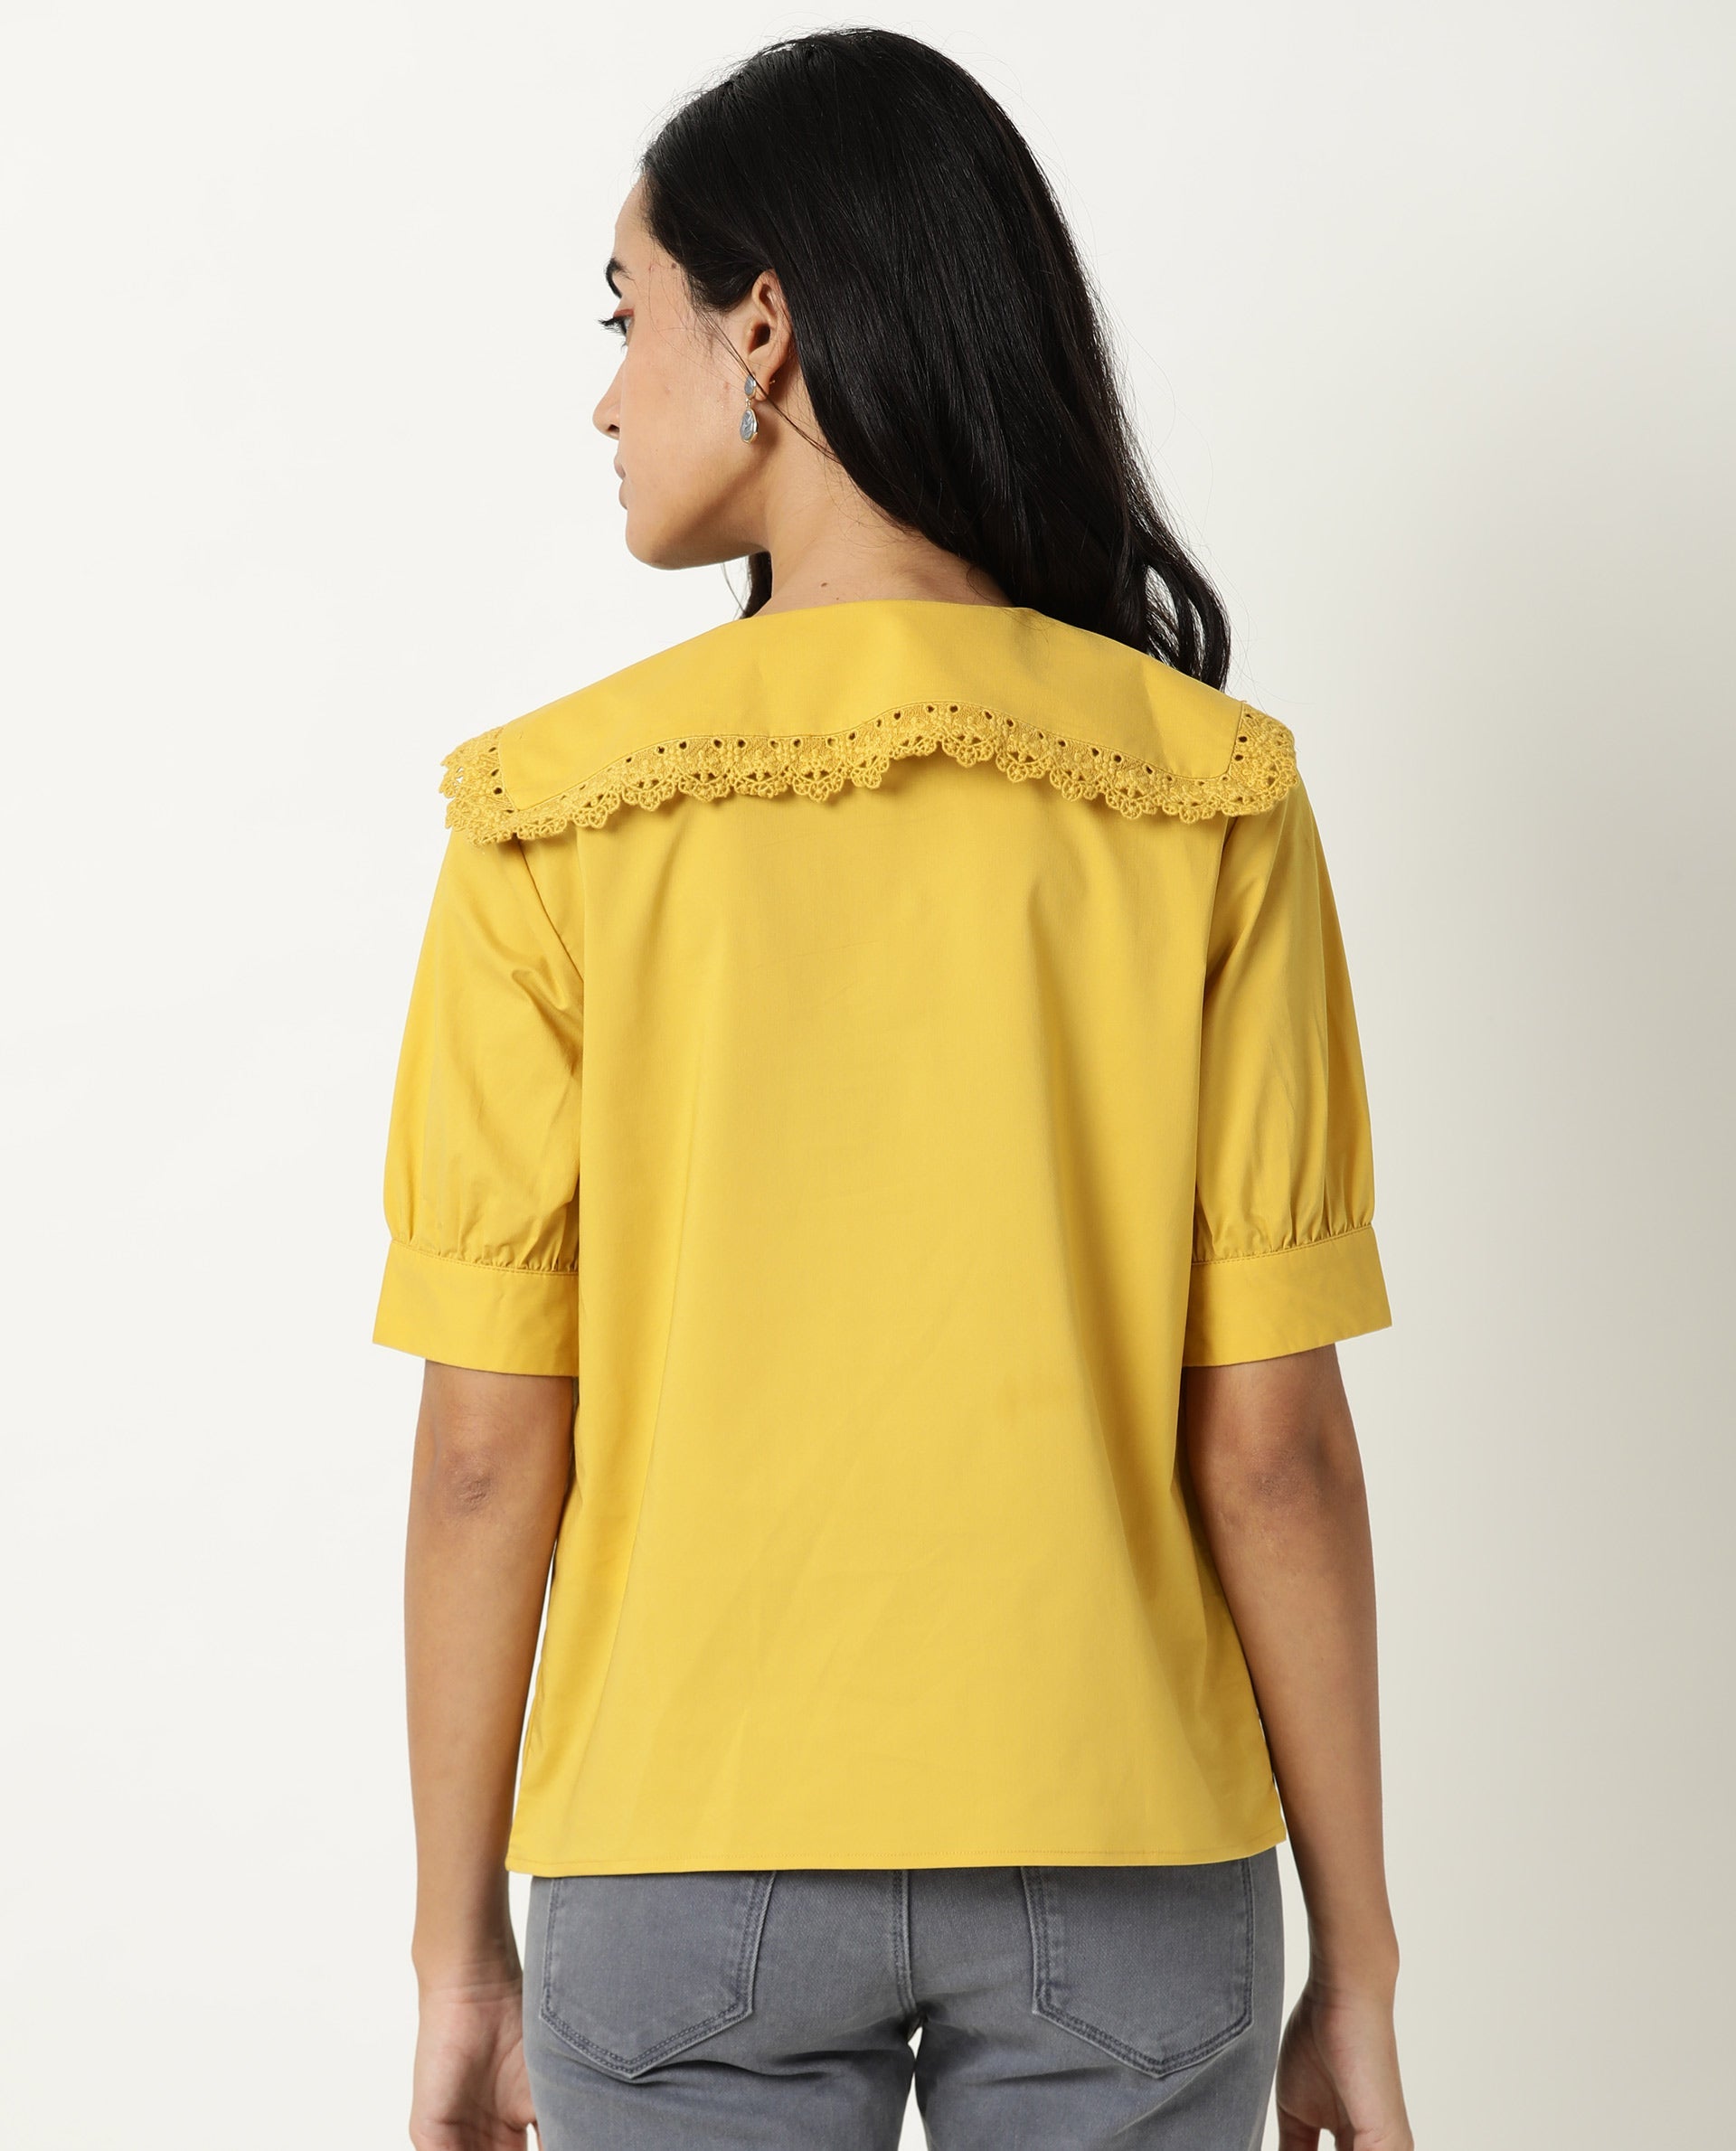 WOMENS FARSE YELLOW TOP Polyester FABRIC Regular FIT Cuffed Sleeve Collared Neck